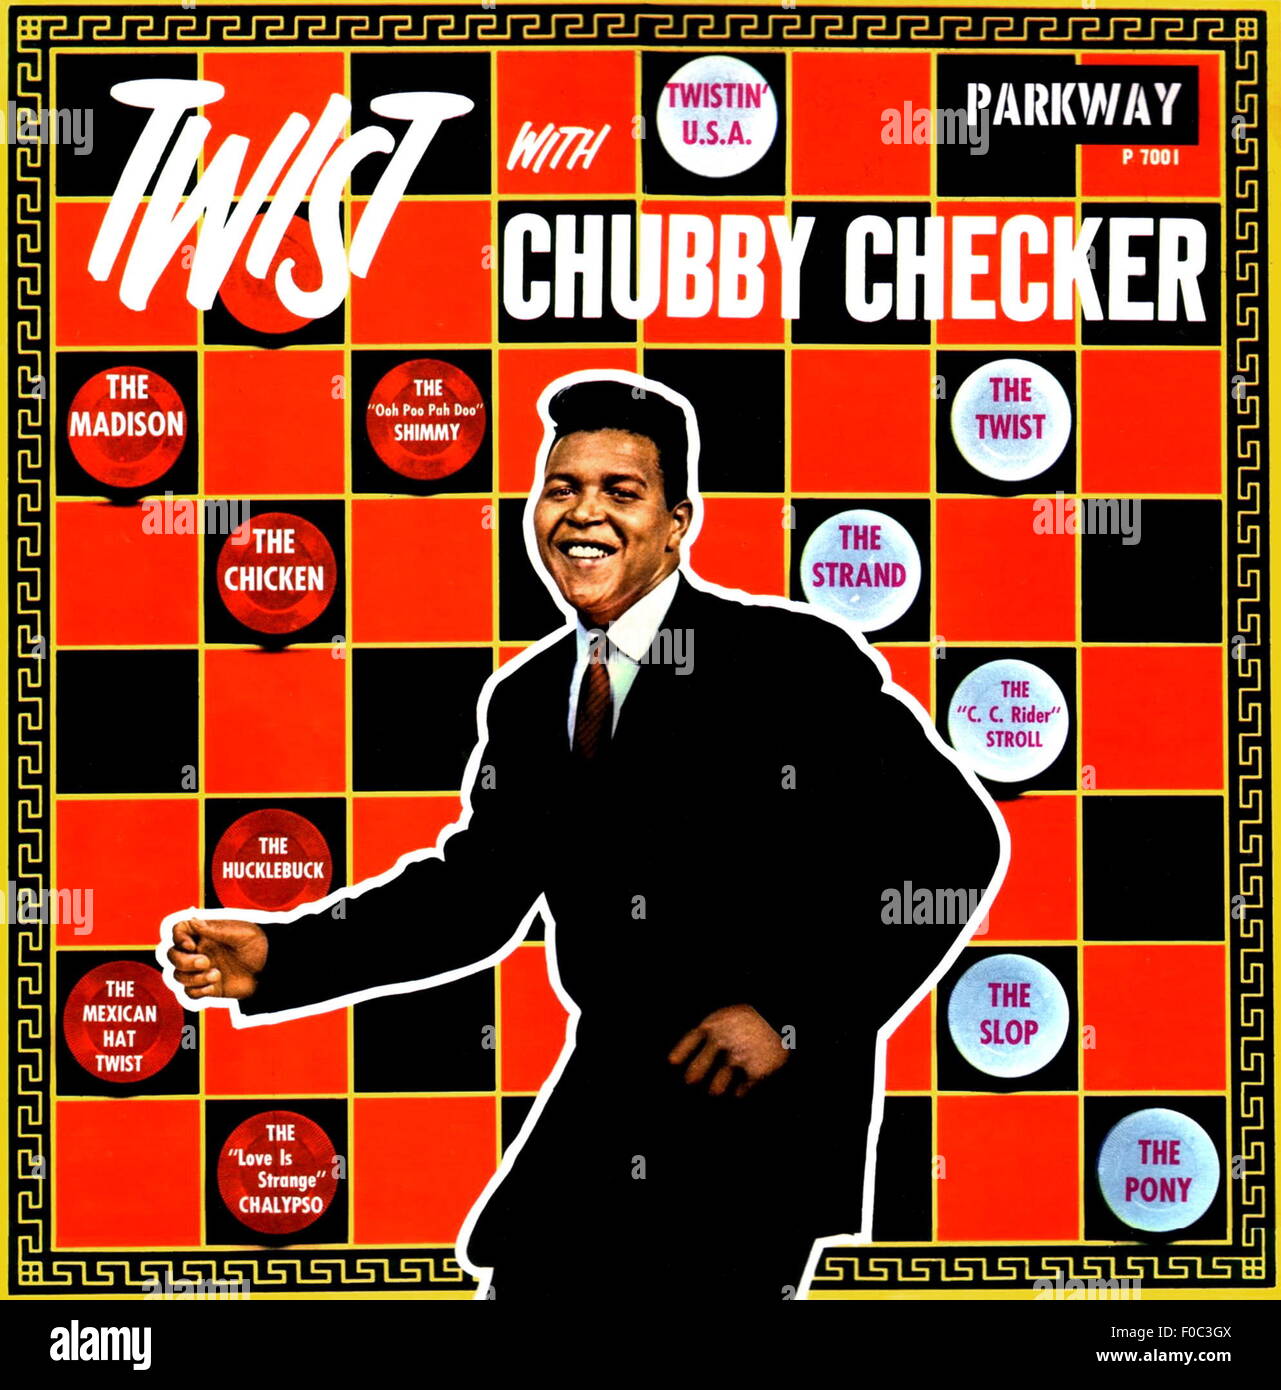 music, records, 'Twist with Chubby Checker', by Chubby Checker, cover, Parkway Records, Philadelphia, 1960, Additional-Rights-Clearences-Not Available Stock Photo